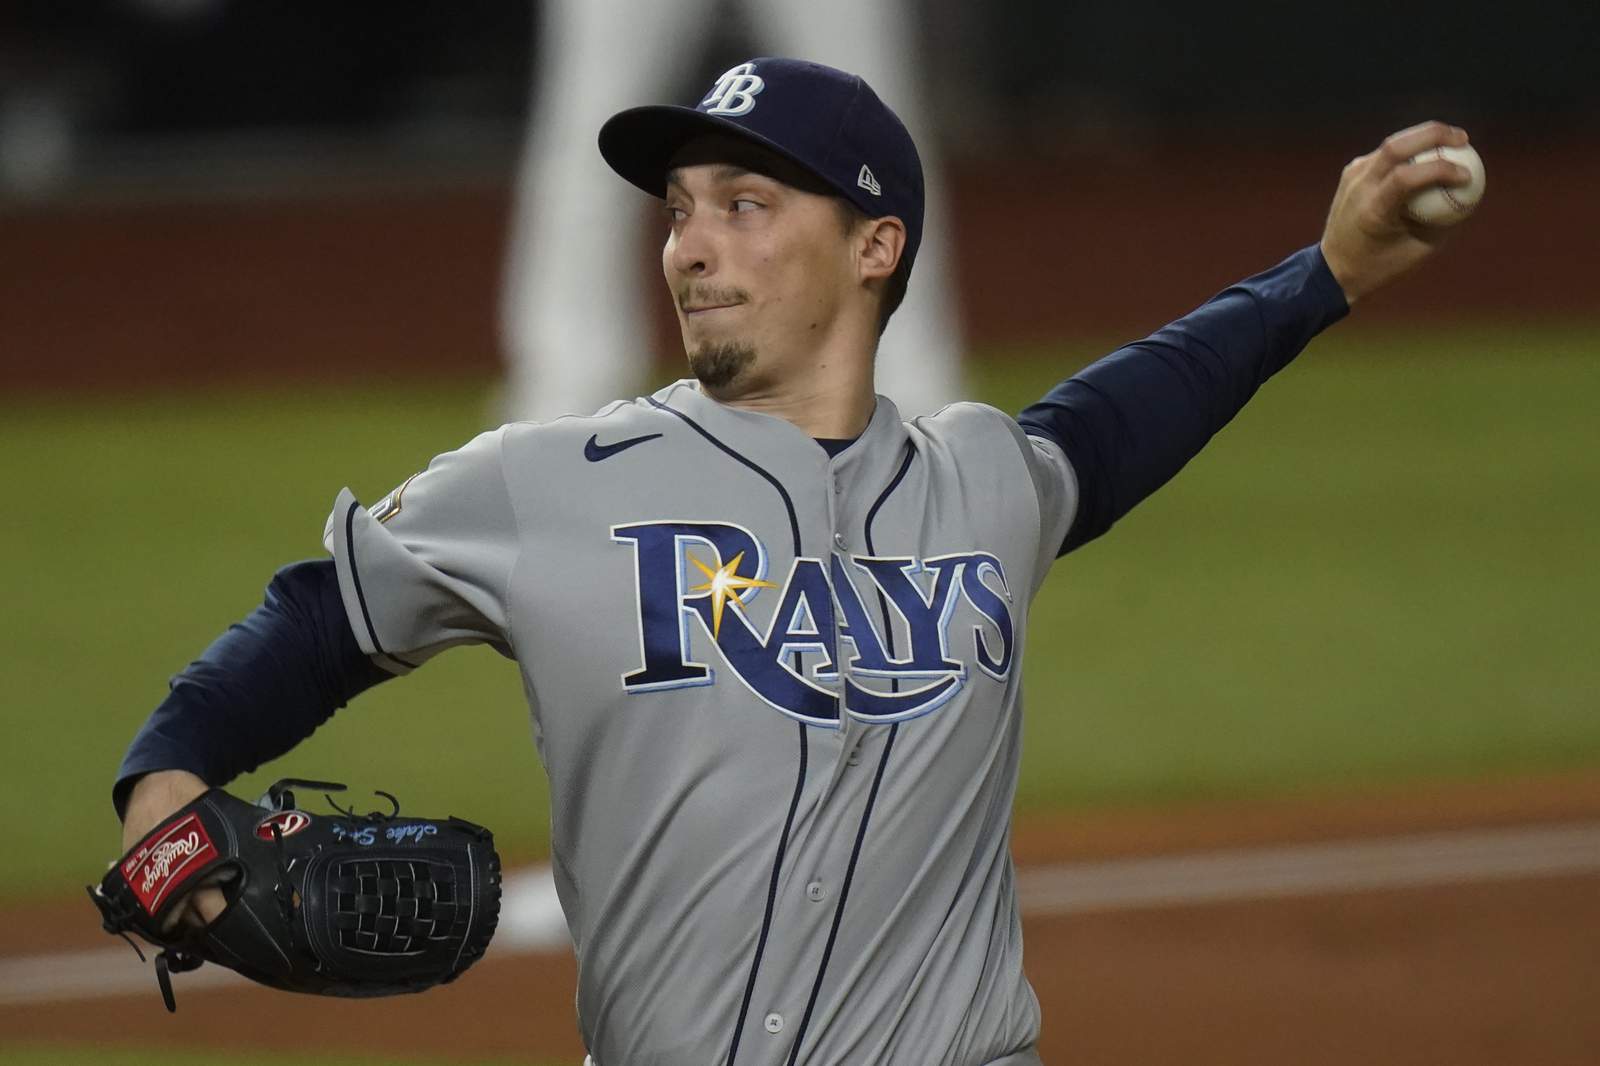 AP source: Padres have deal in place to get Snell from Rays